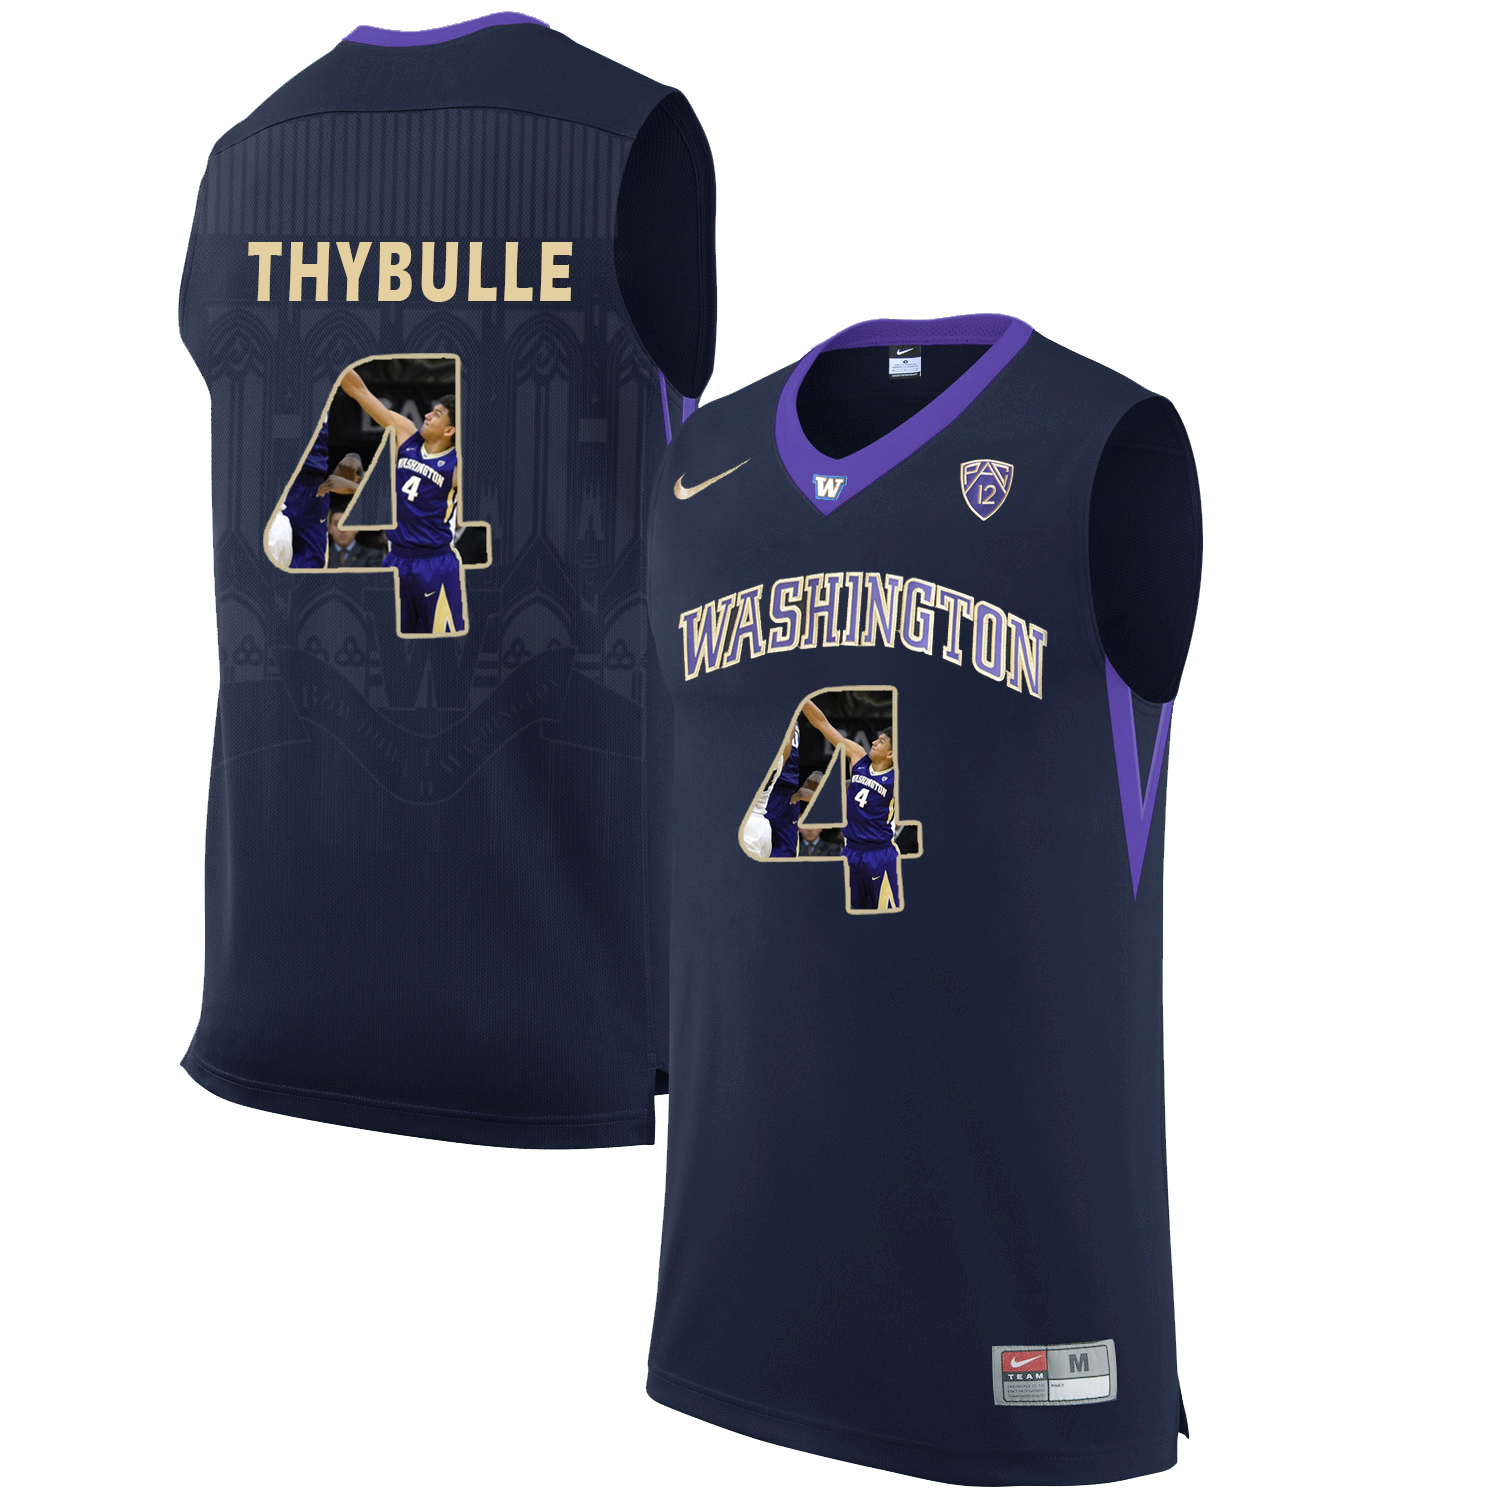 Washington Huskies 4 Matisse Thybulle Black With Portait College Basketball Jersey - Click Image to Close